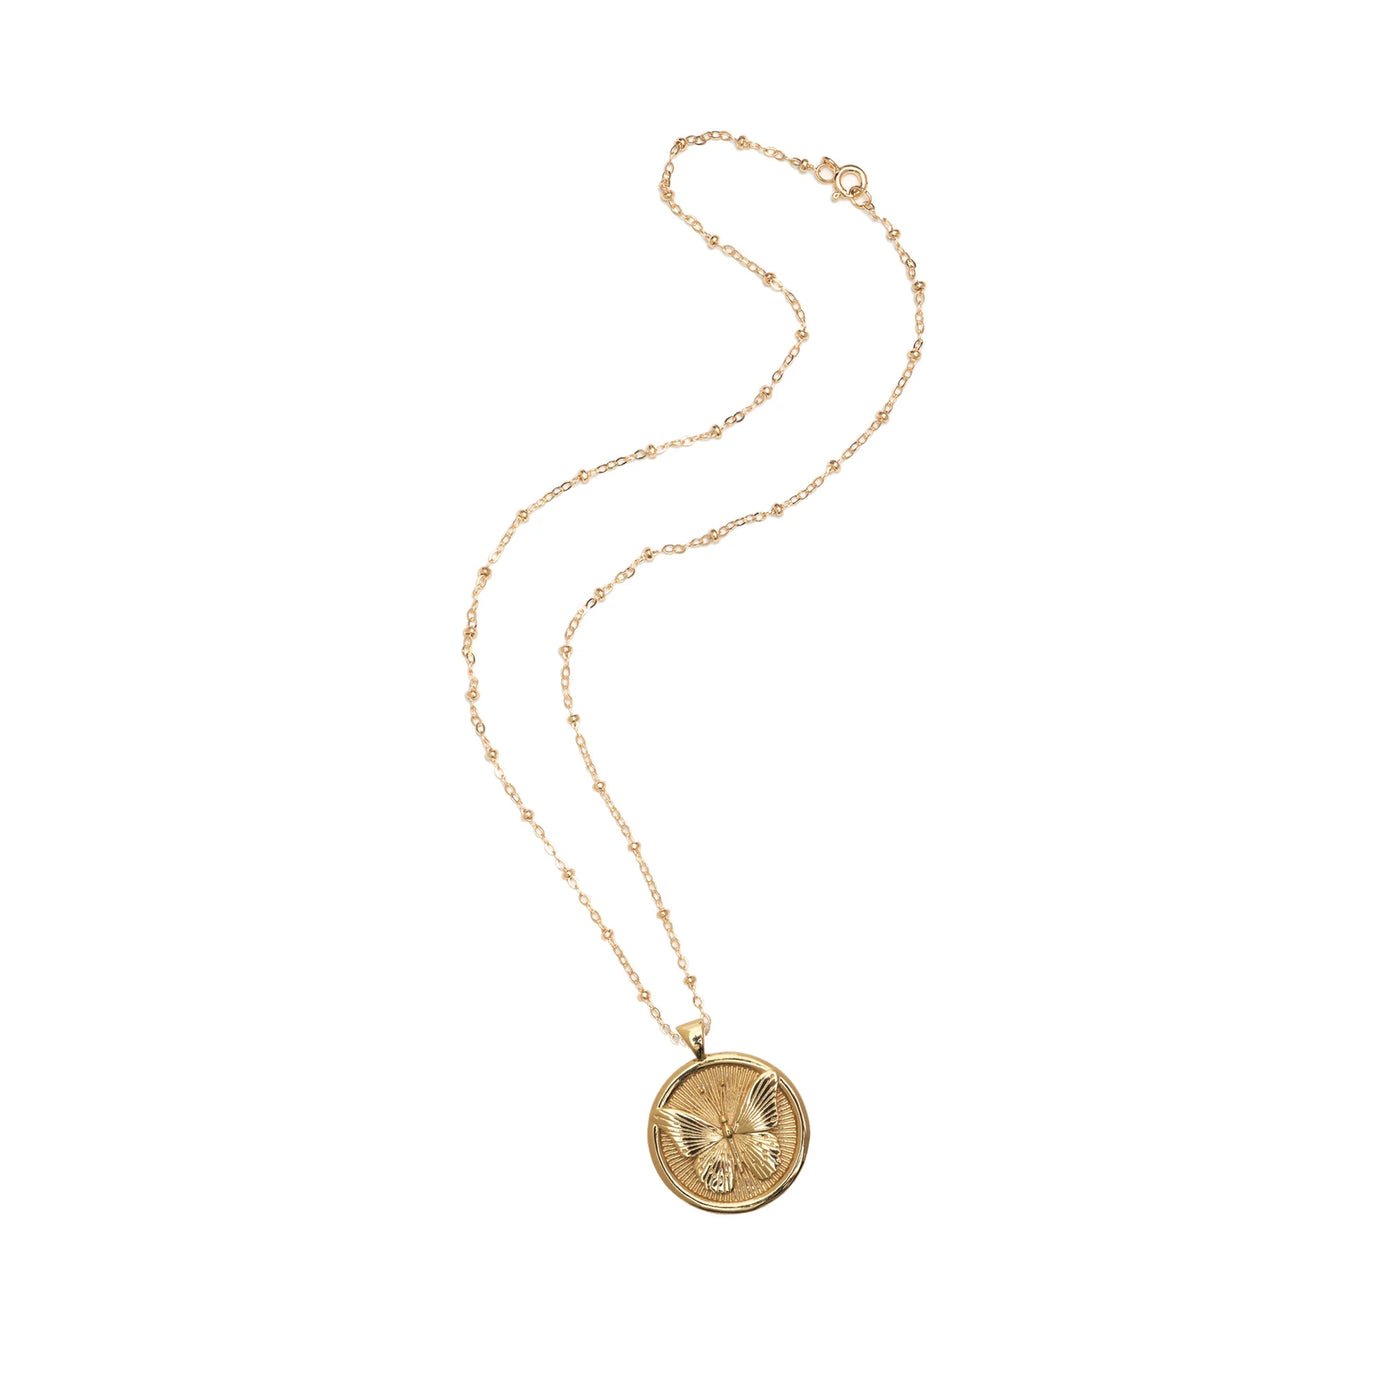 Free Coin Necklace - Small